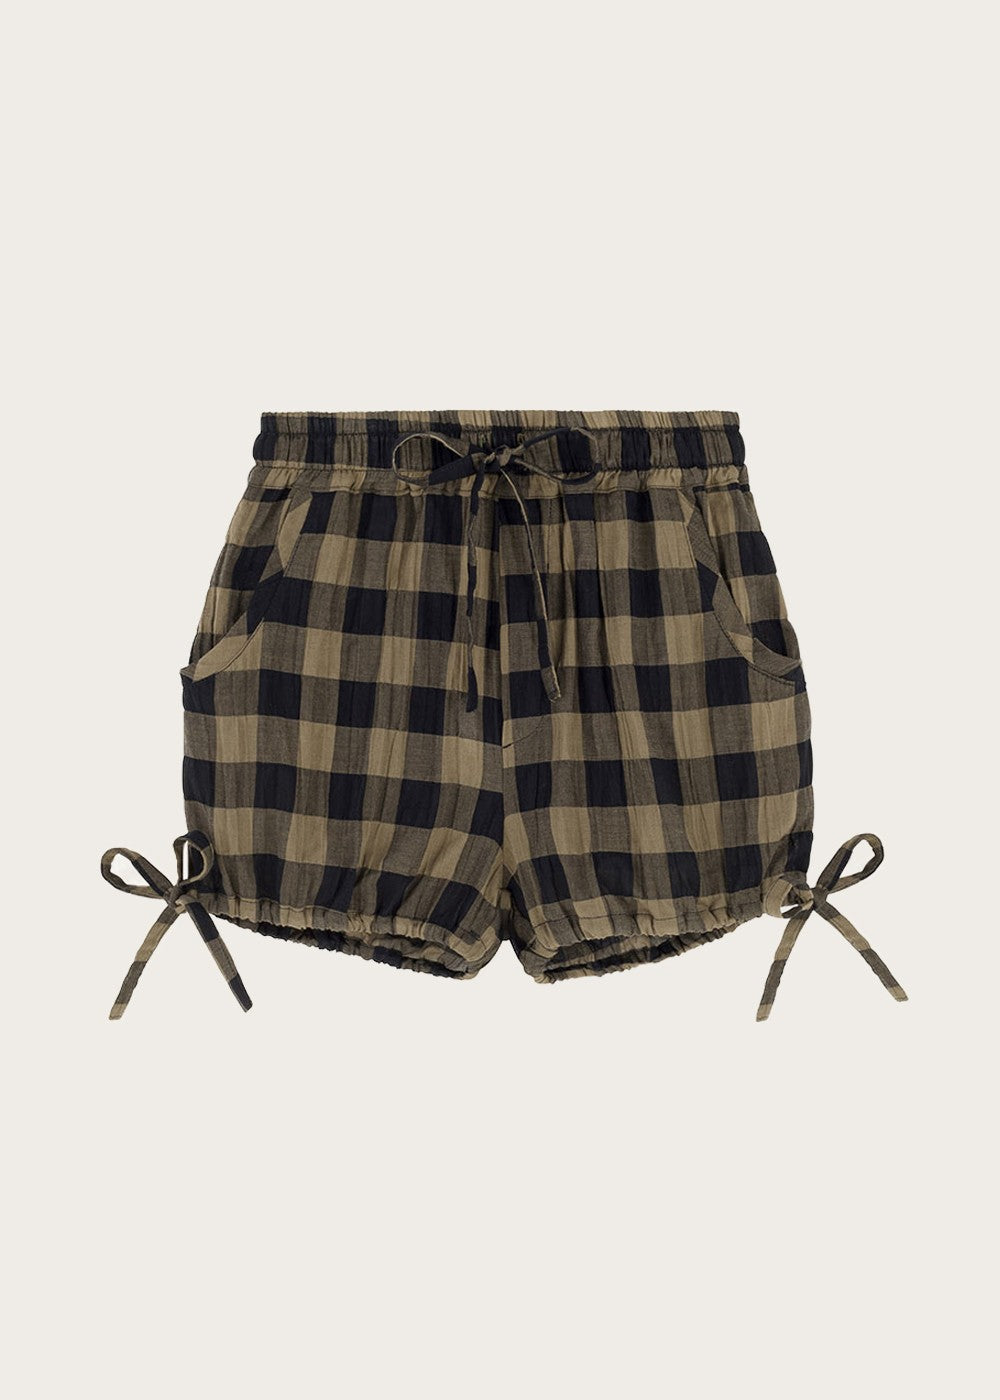 KIDS ON THE MOON BLOOMERS SHORTS - KHAKI CLASSIC CHECK